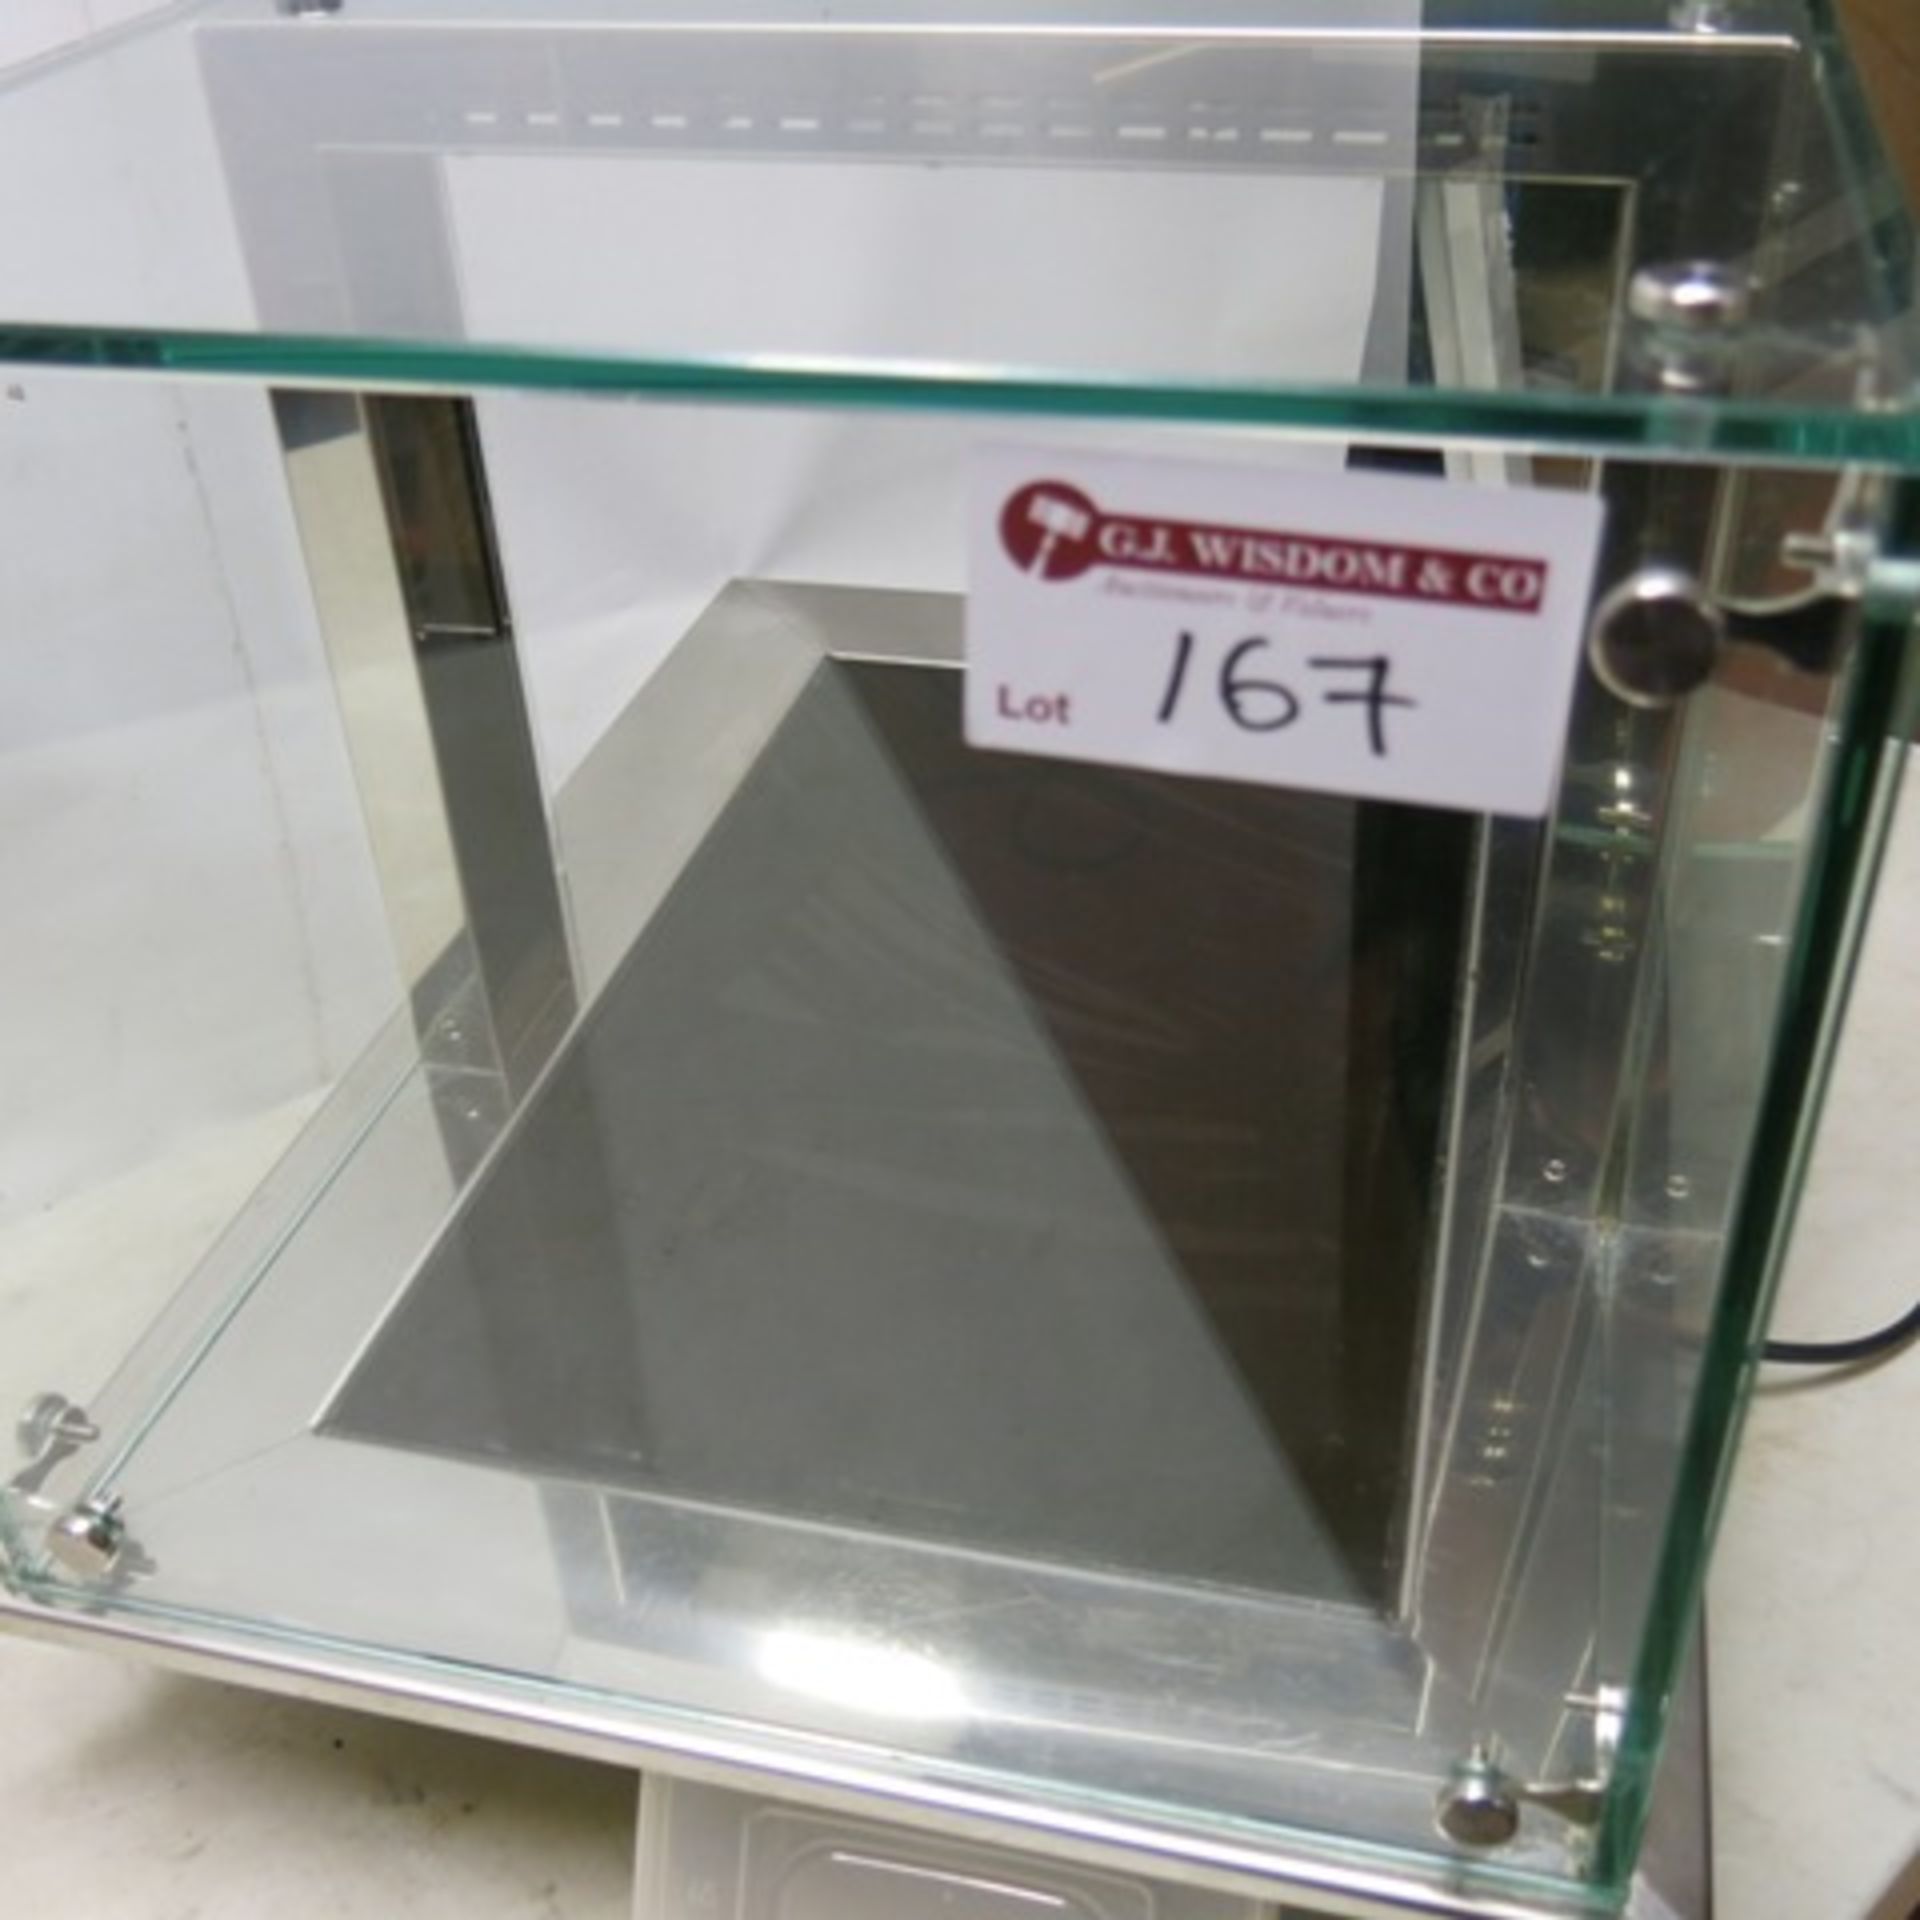 Cafecounters Heated Cerran Drop-In Hotplate in Glass Display Surround with Digital Display, Model - Image 4 of 7